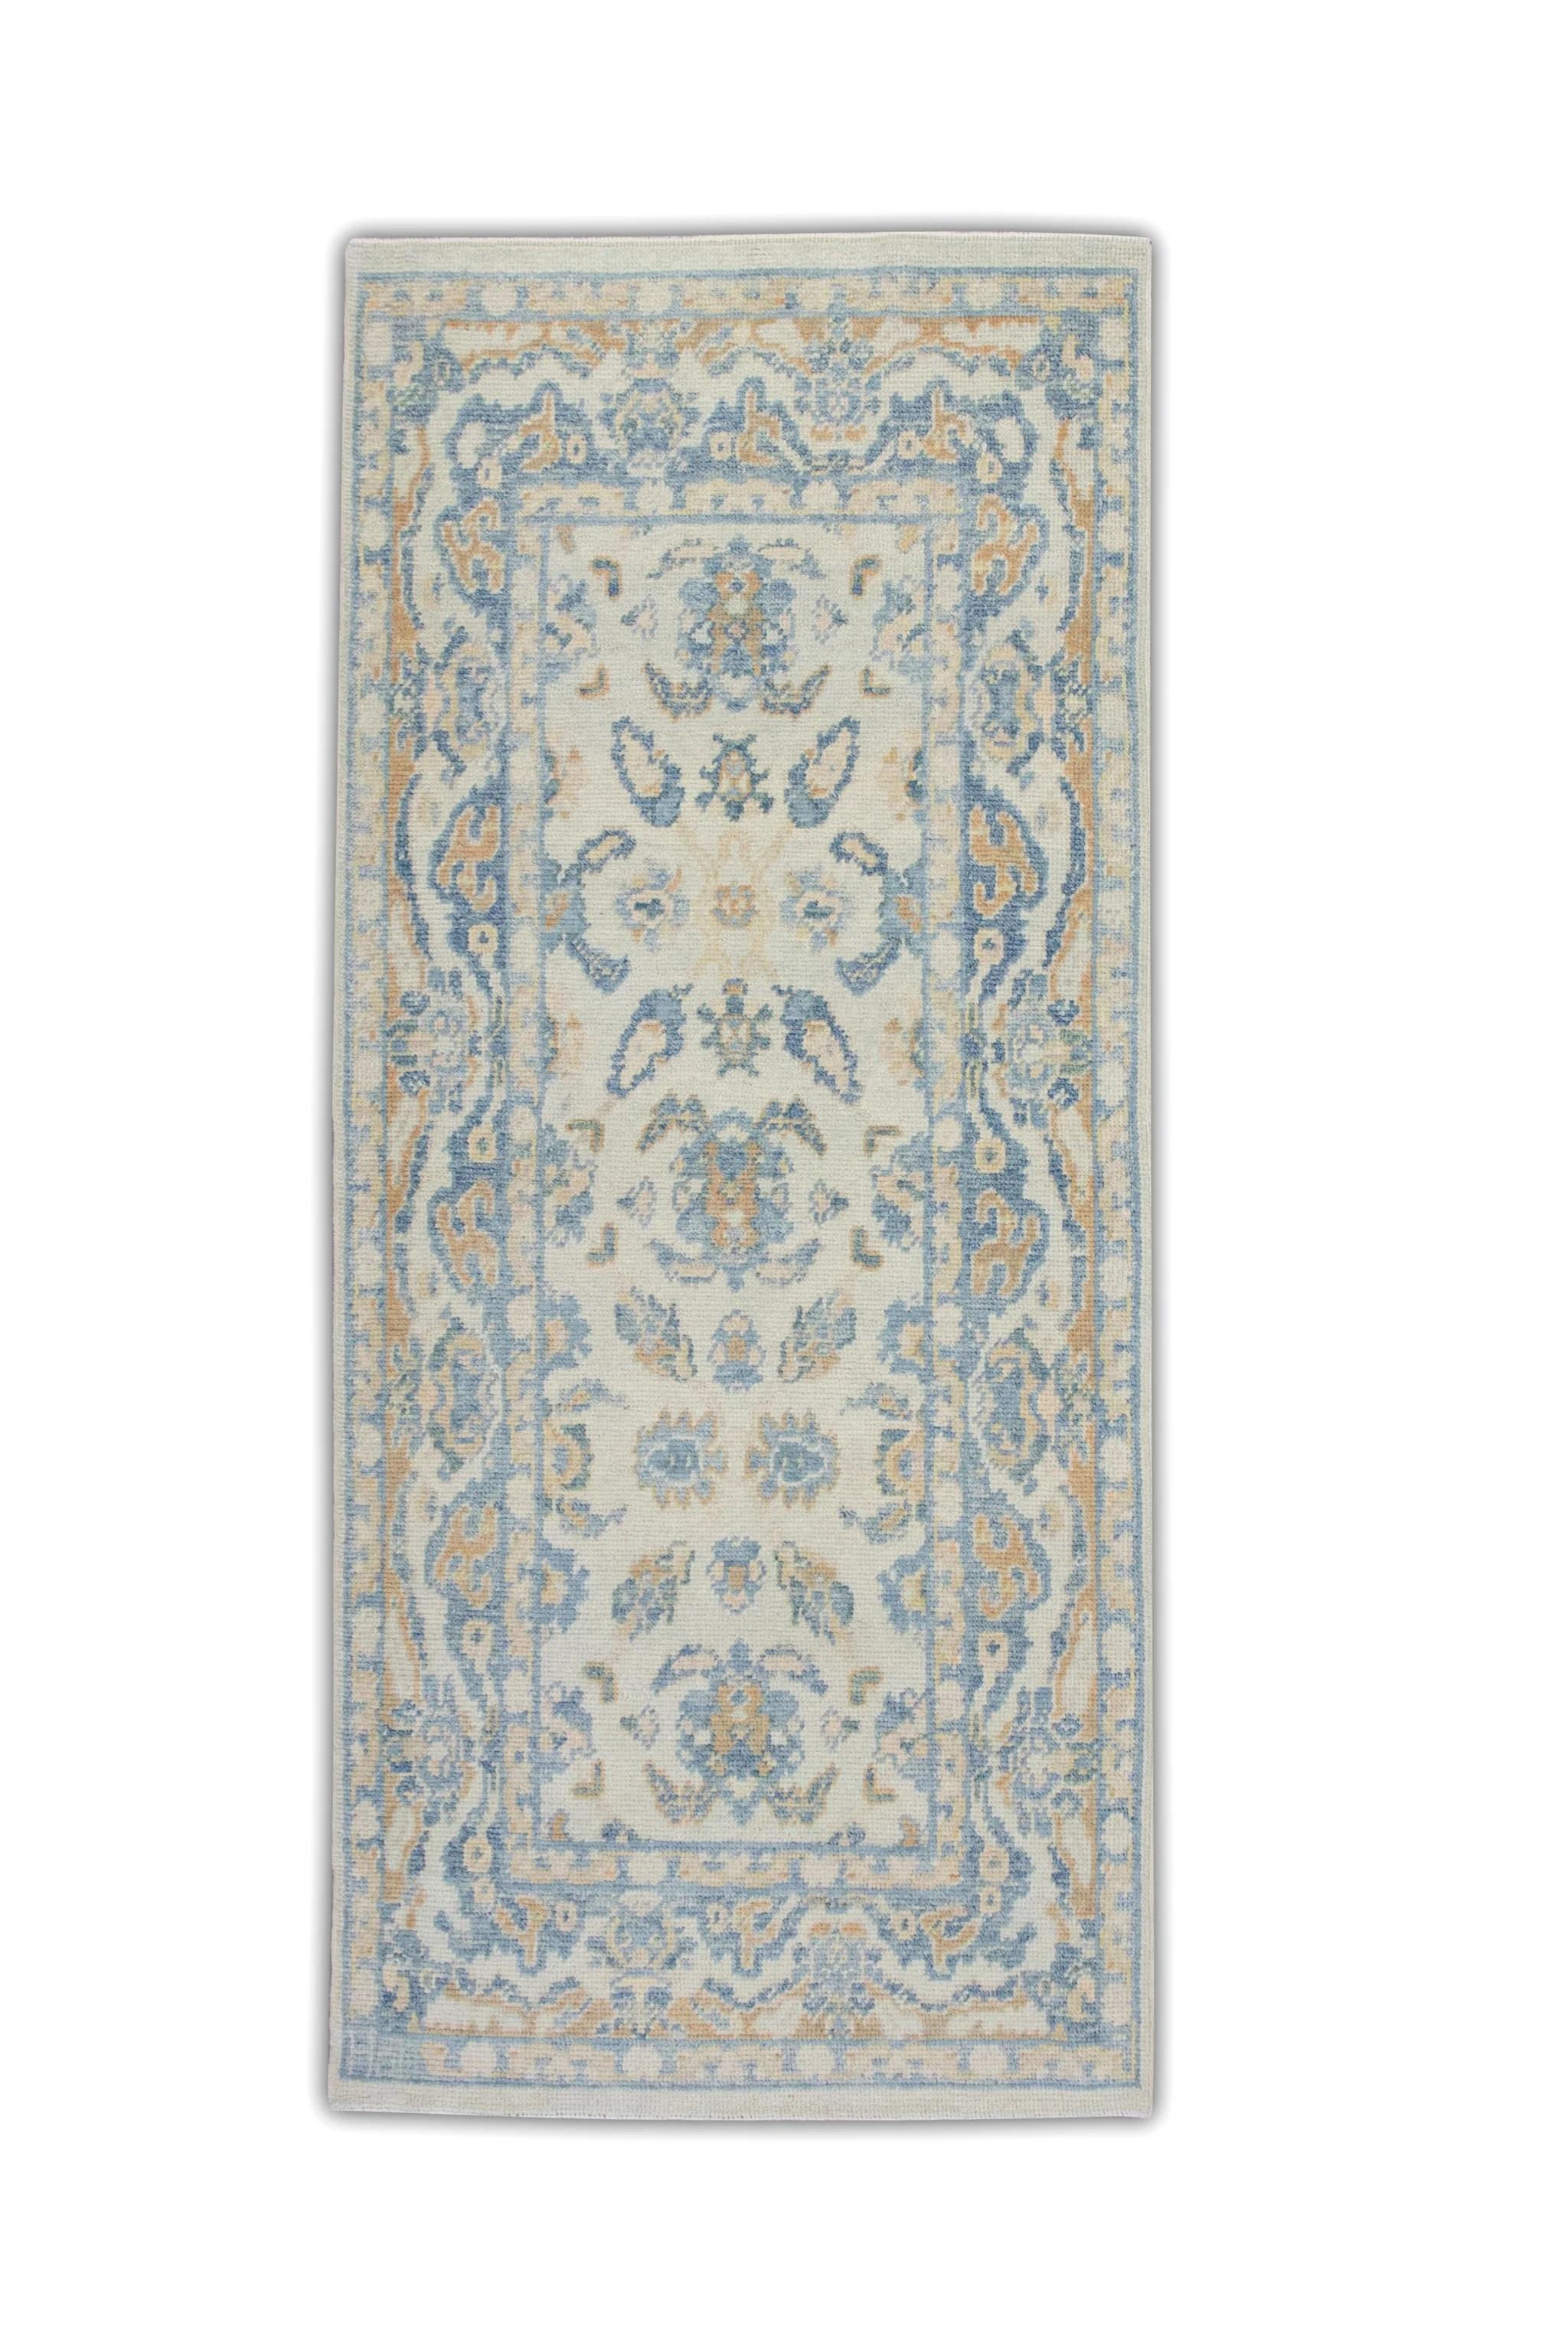 Blue and Yellow Floral Handwoven Wool Turkish Oushak Rug 3'2